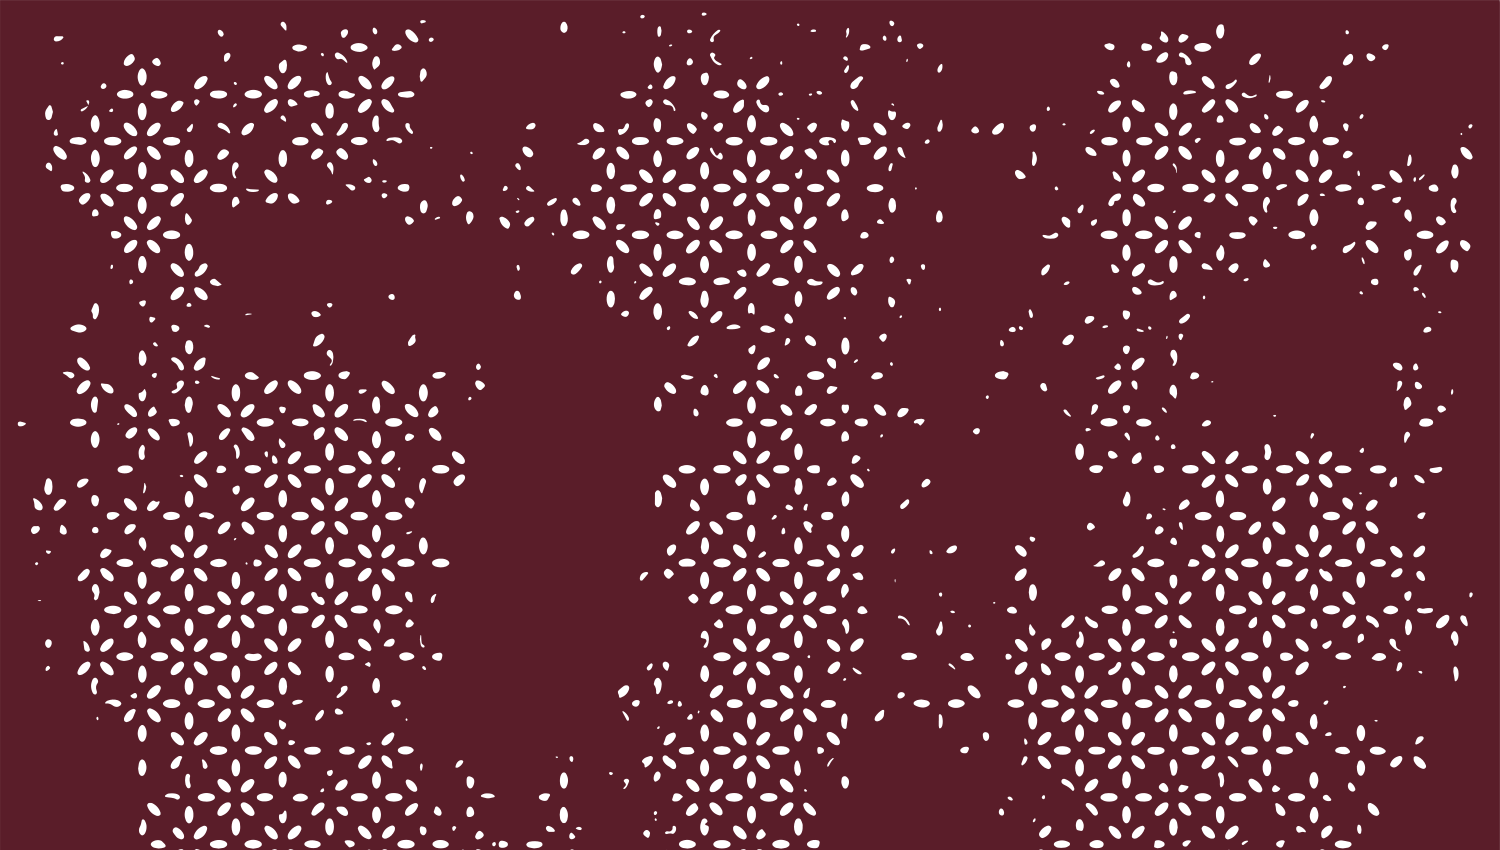 Parasoleil™ White Sands© pattern displayed with a burgundy color overlay